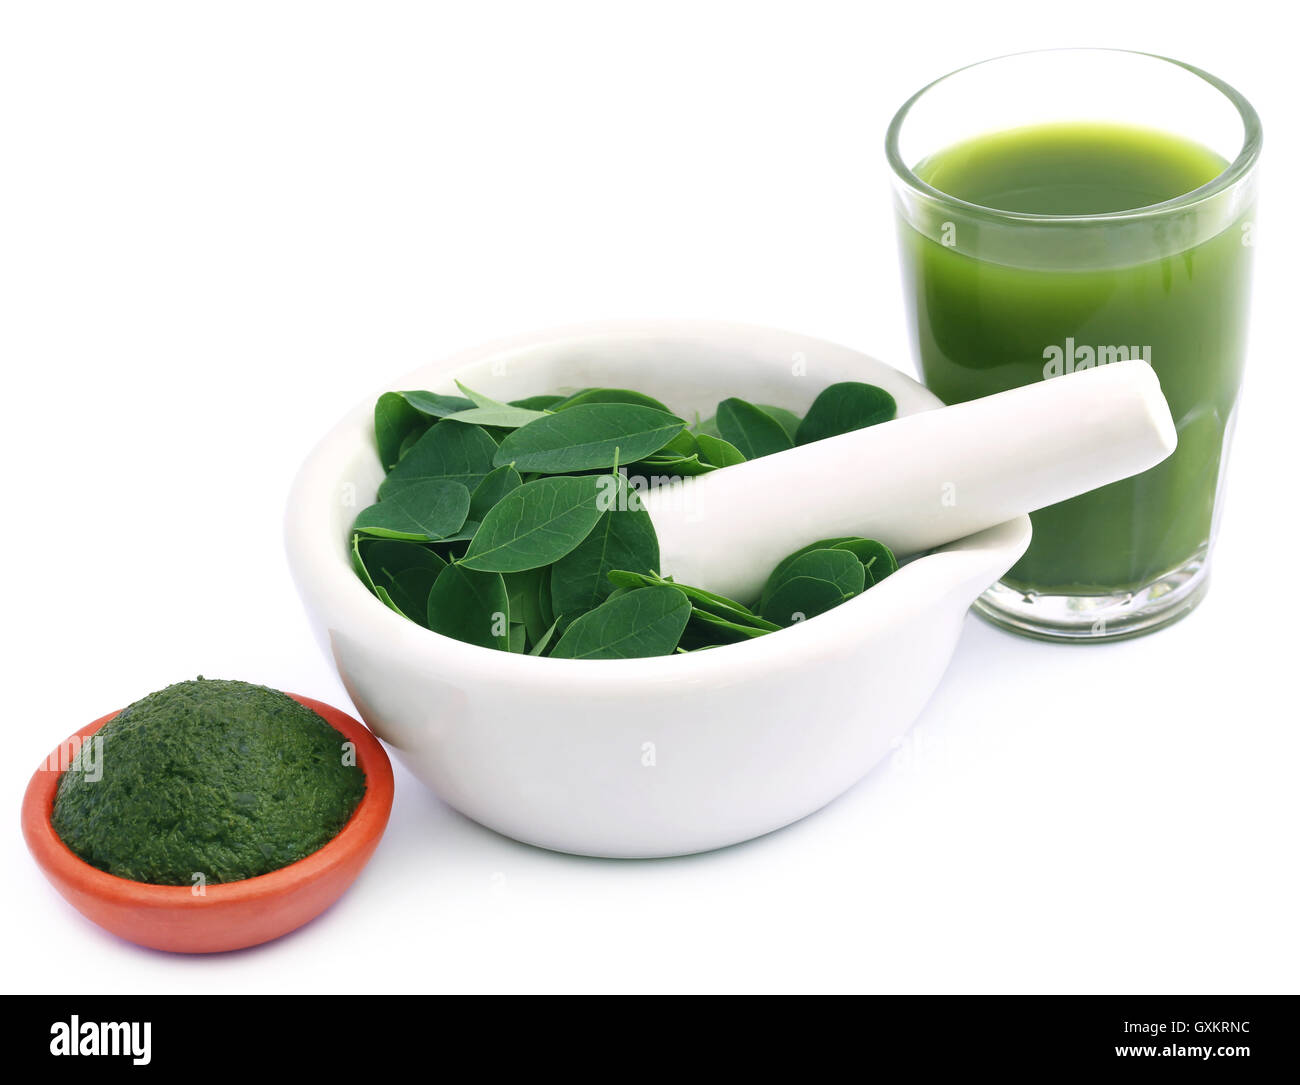 Edible moringa leaves with extract and ground paste Stock Photo